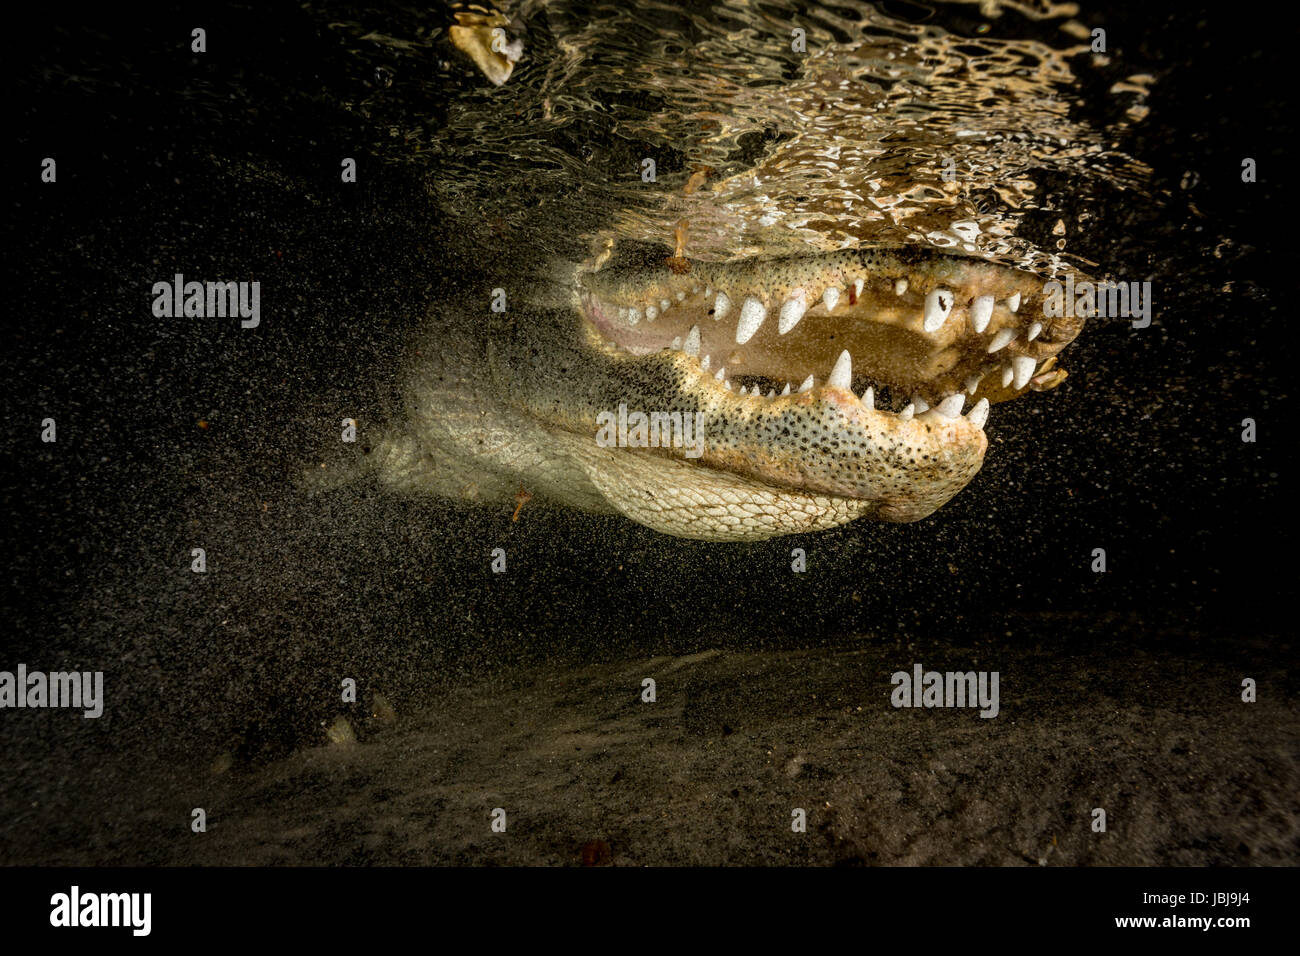 american alligator with its mouth open just under the surface in shallow water, you can see its reflection on the underside of waters surface Stock Photo